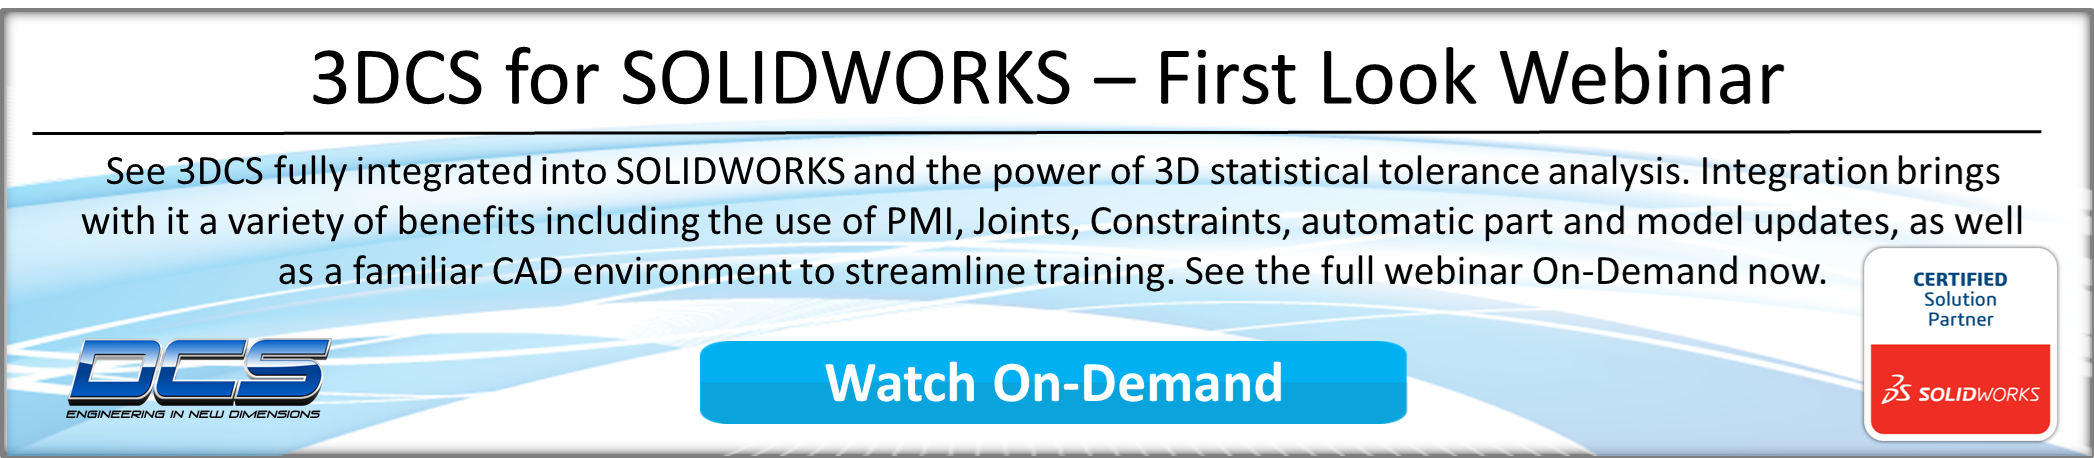 3DCS for SOLIDWORKS On-Demand 